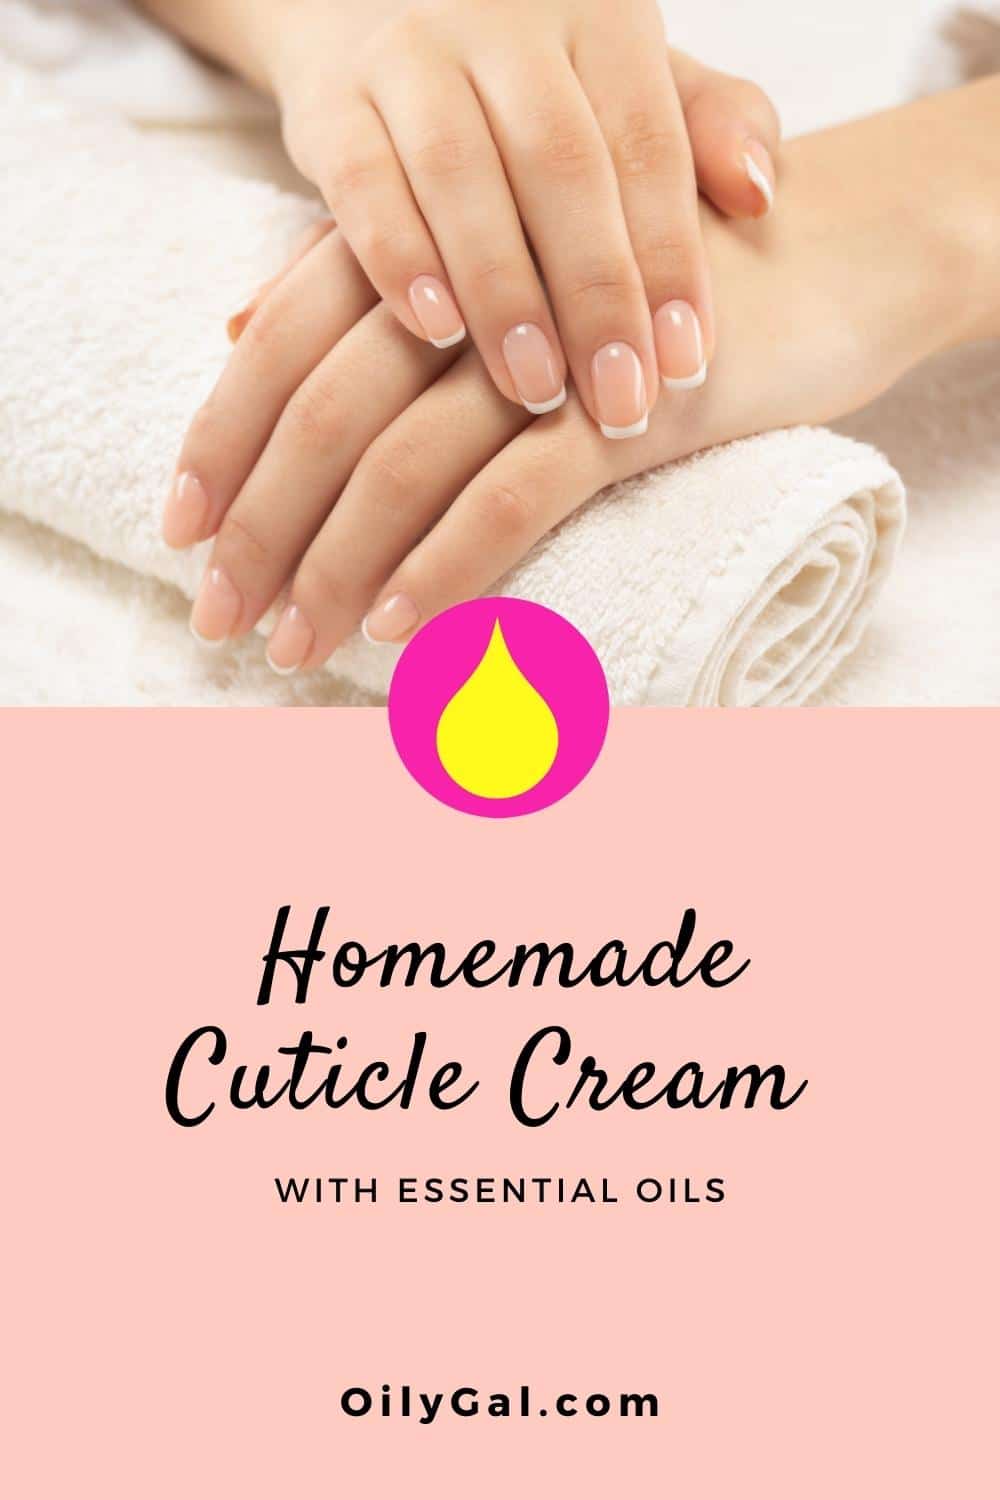 Cuticle Cream Recipe with Essential Oils You Can Try at Home - Homemade cuticle cream